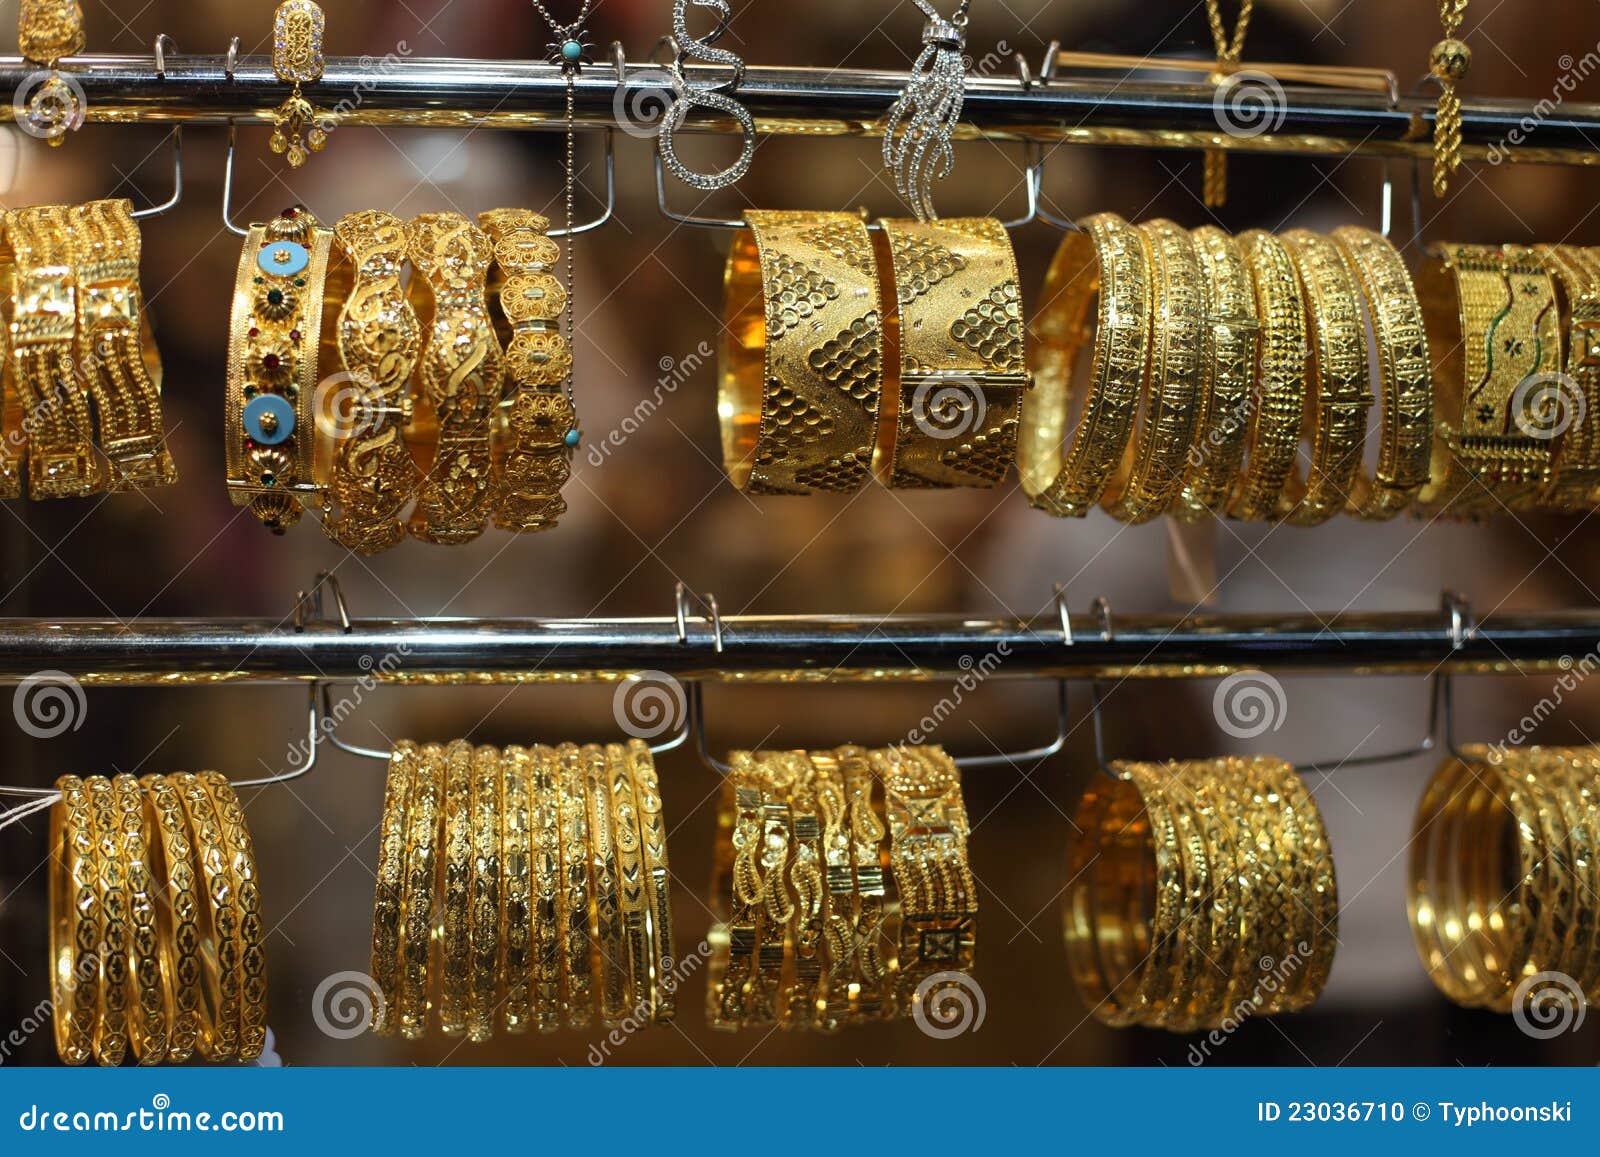 Jewelry For Sale In Gold Souq Stock Photo - Image: 23036710